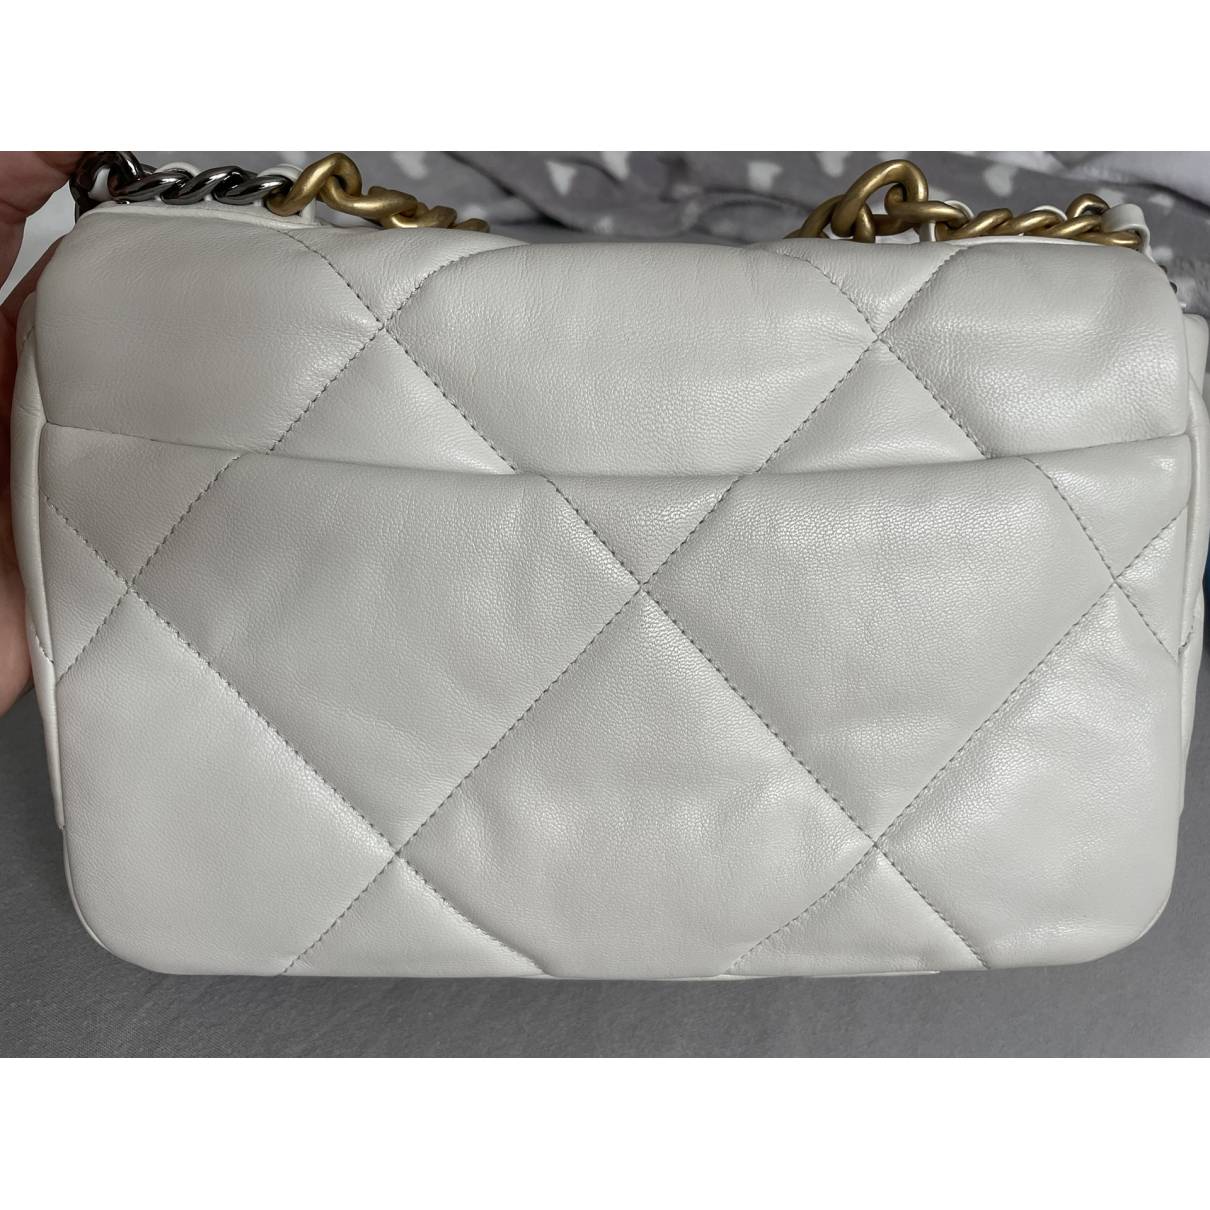 Chanel 19 leather handbag Chanel White in Leather - 35595965